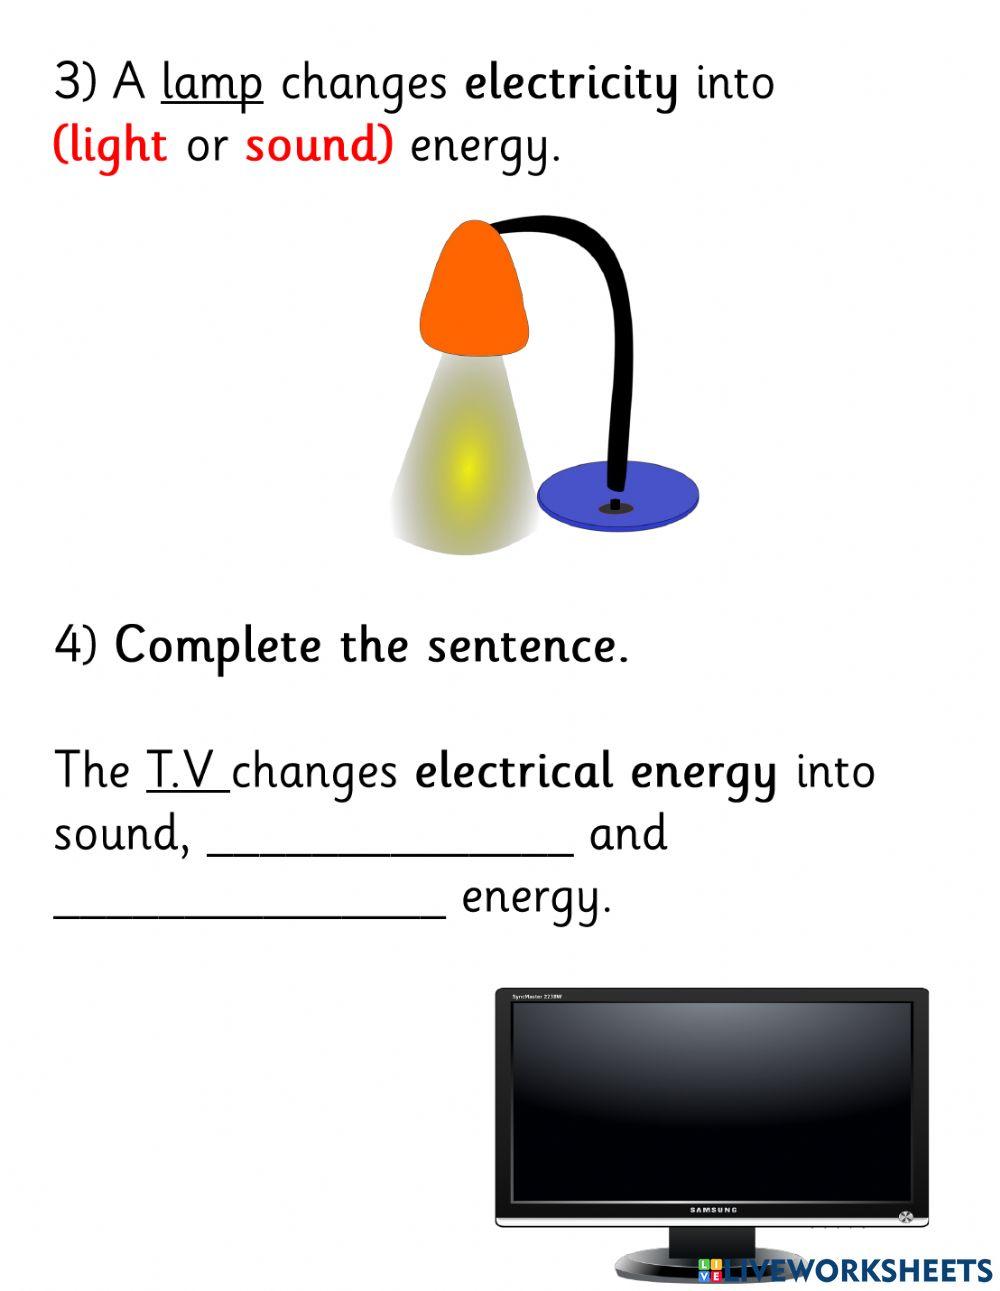 Changing forms of energy